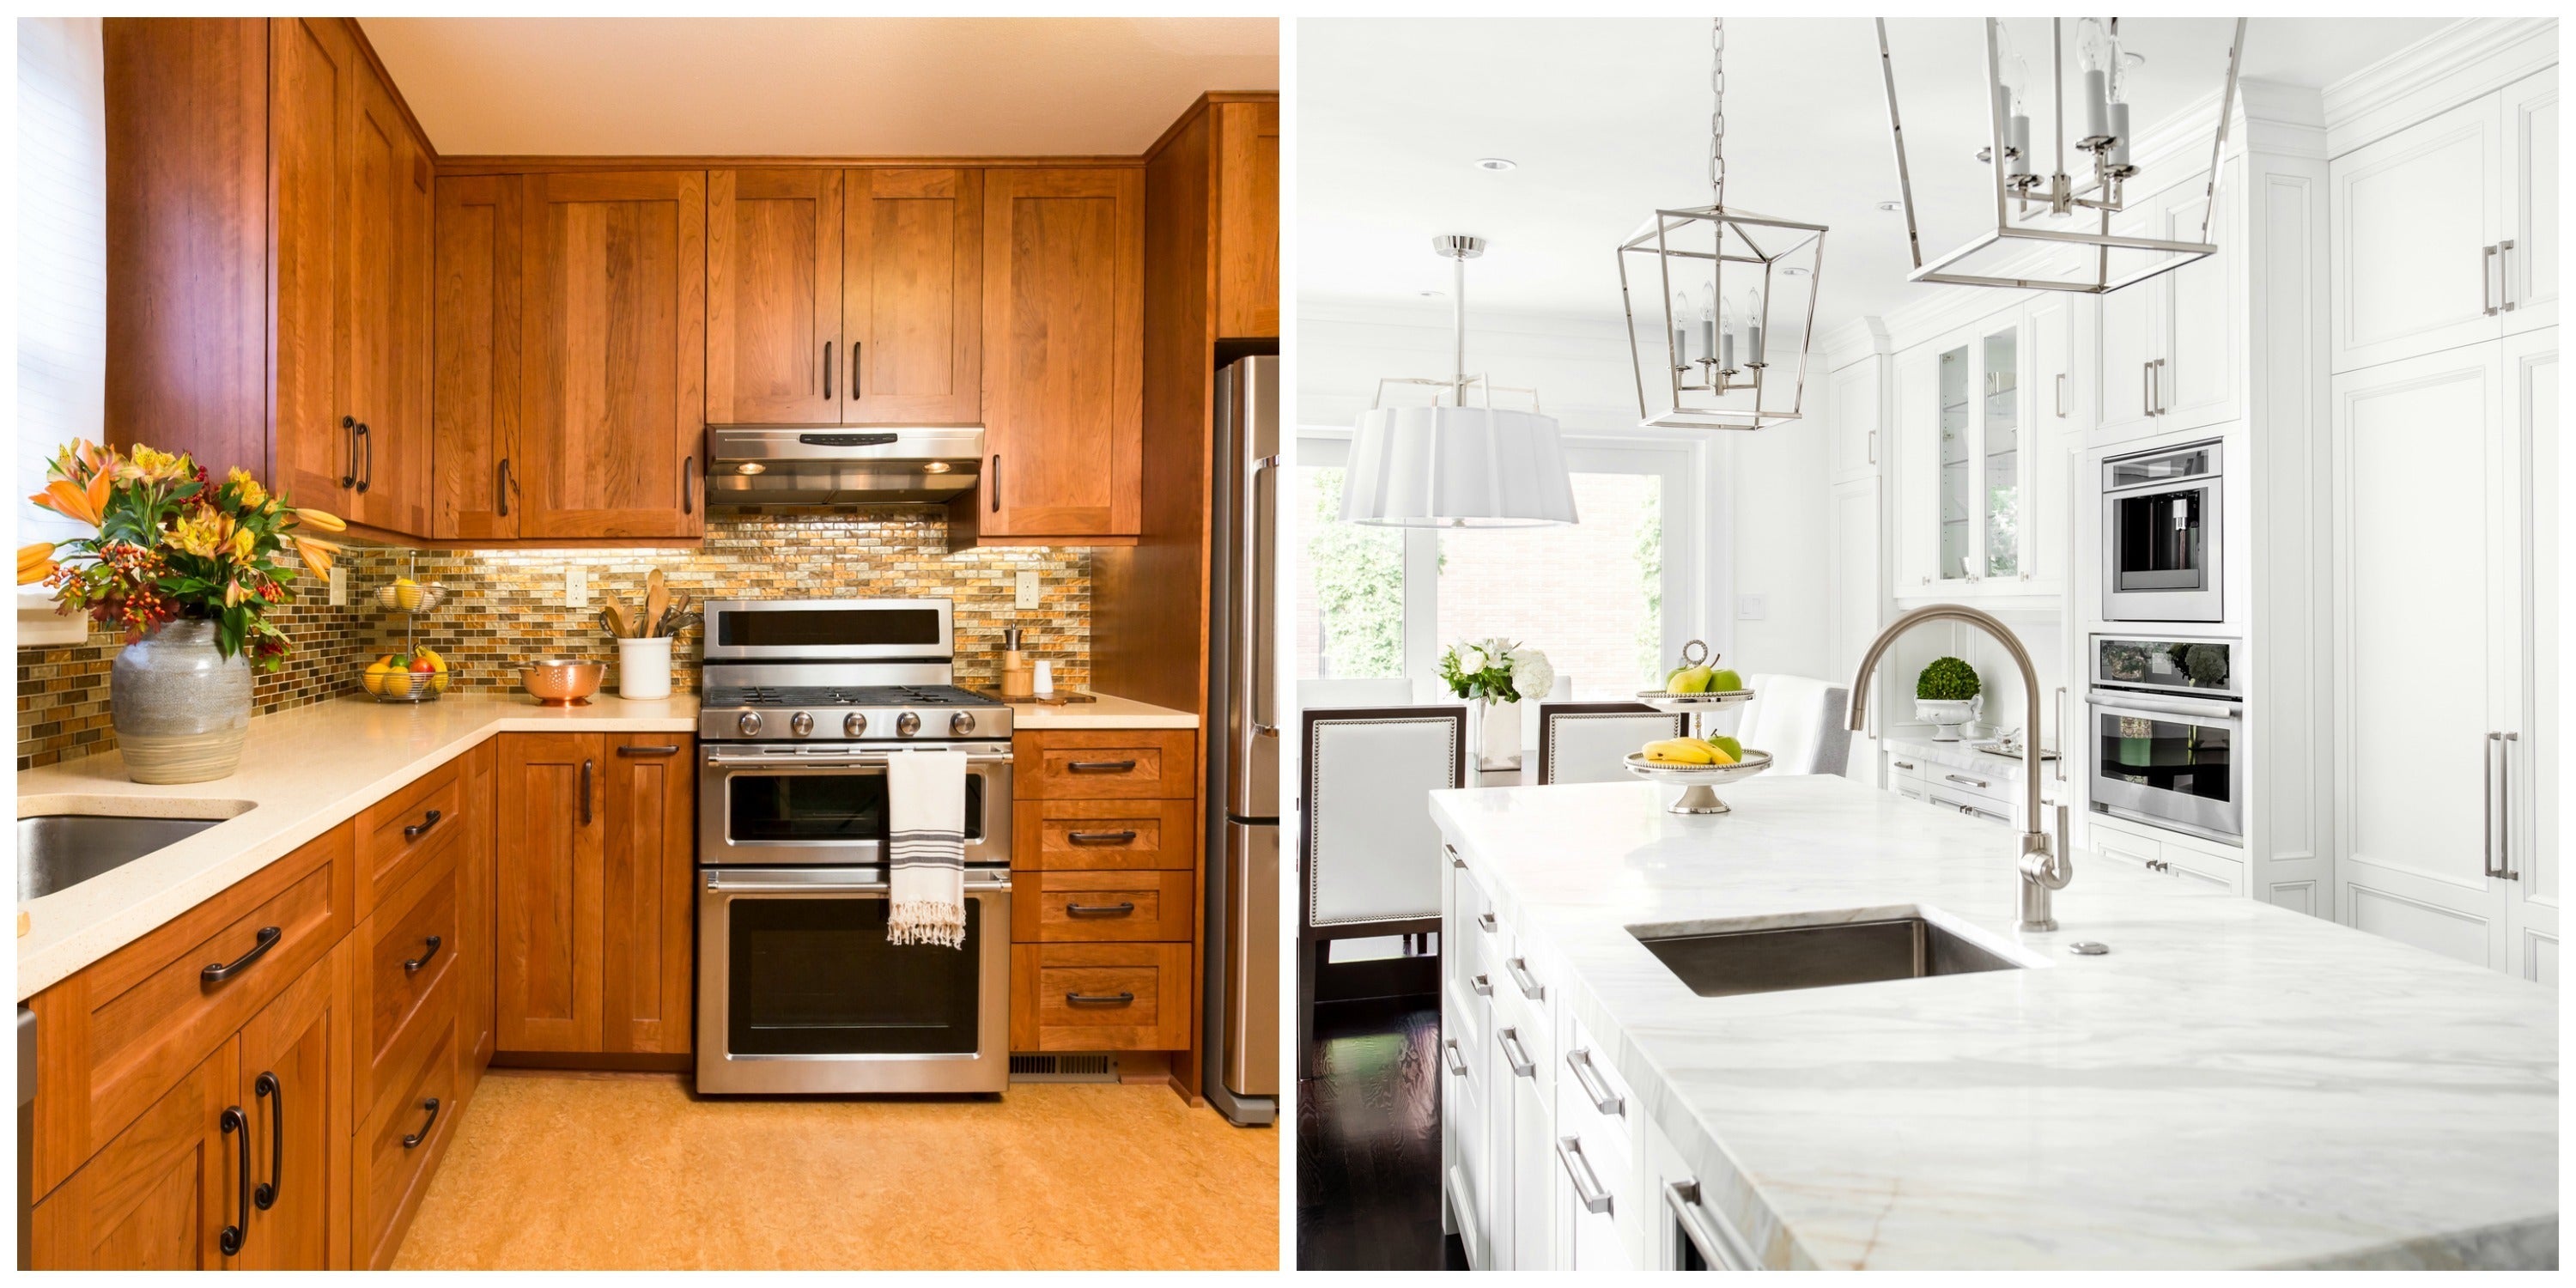 Can You Design Your Dream Kitchen Without Going Over Your Budget?